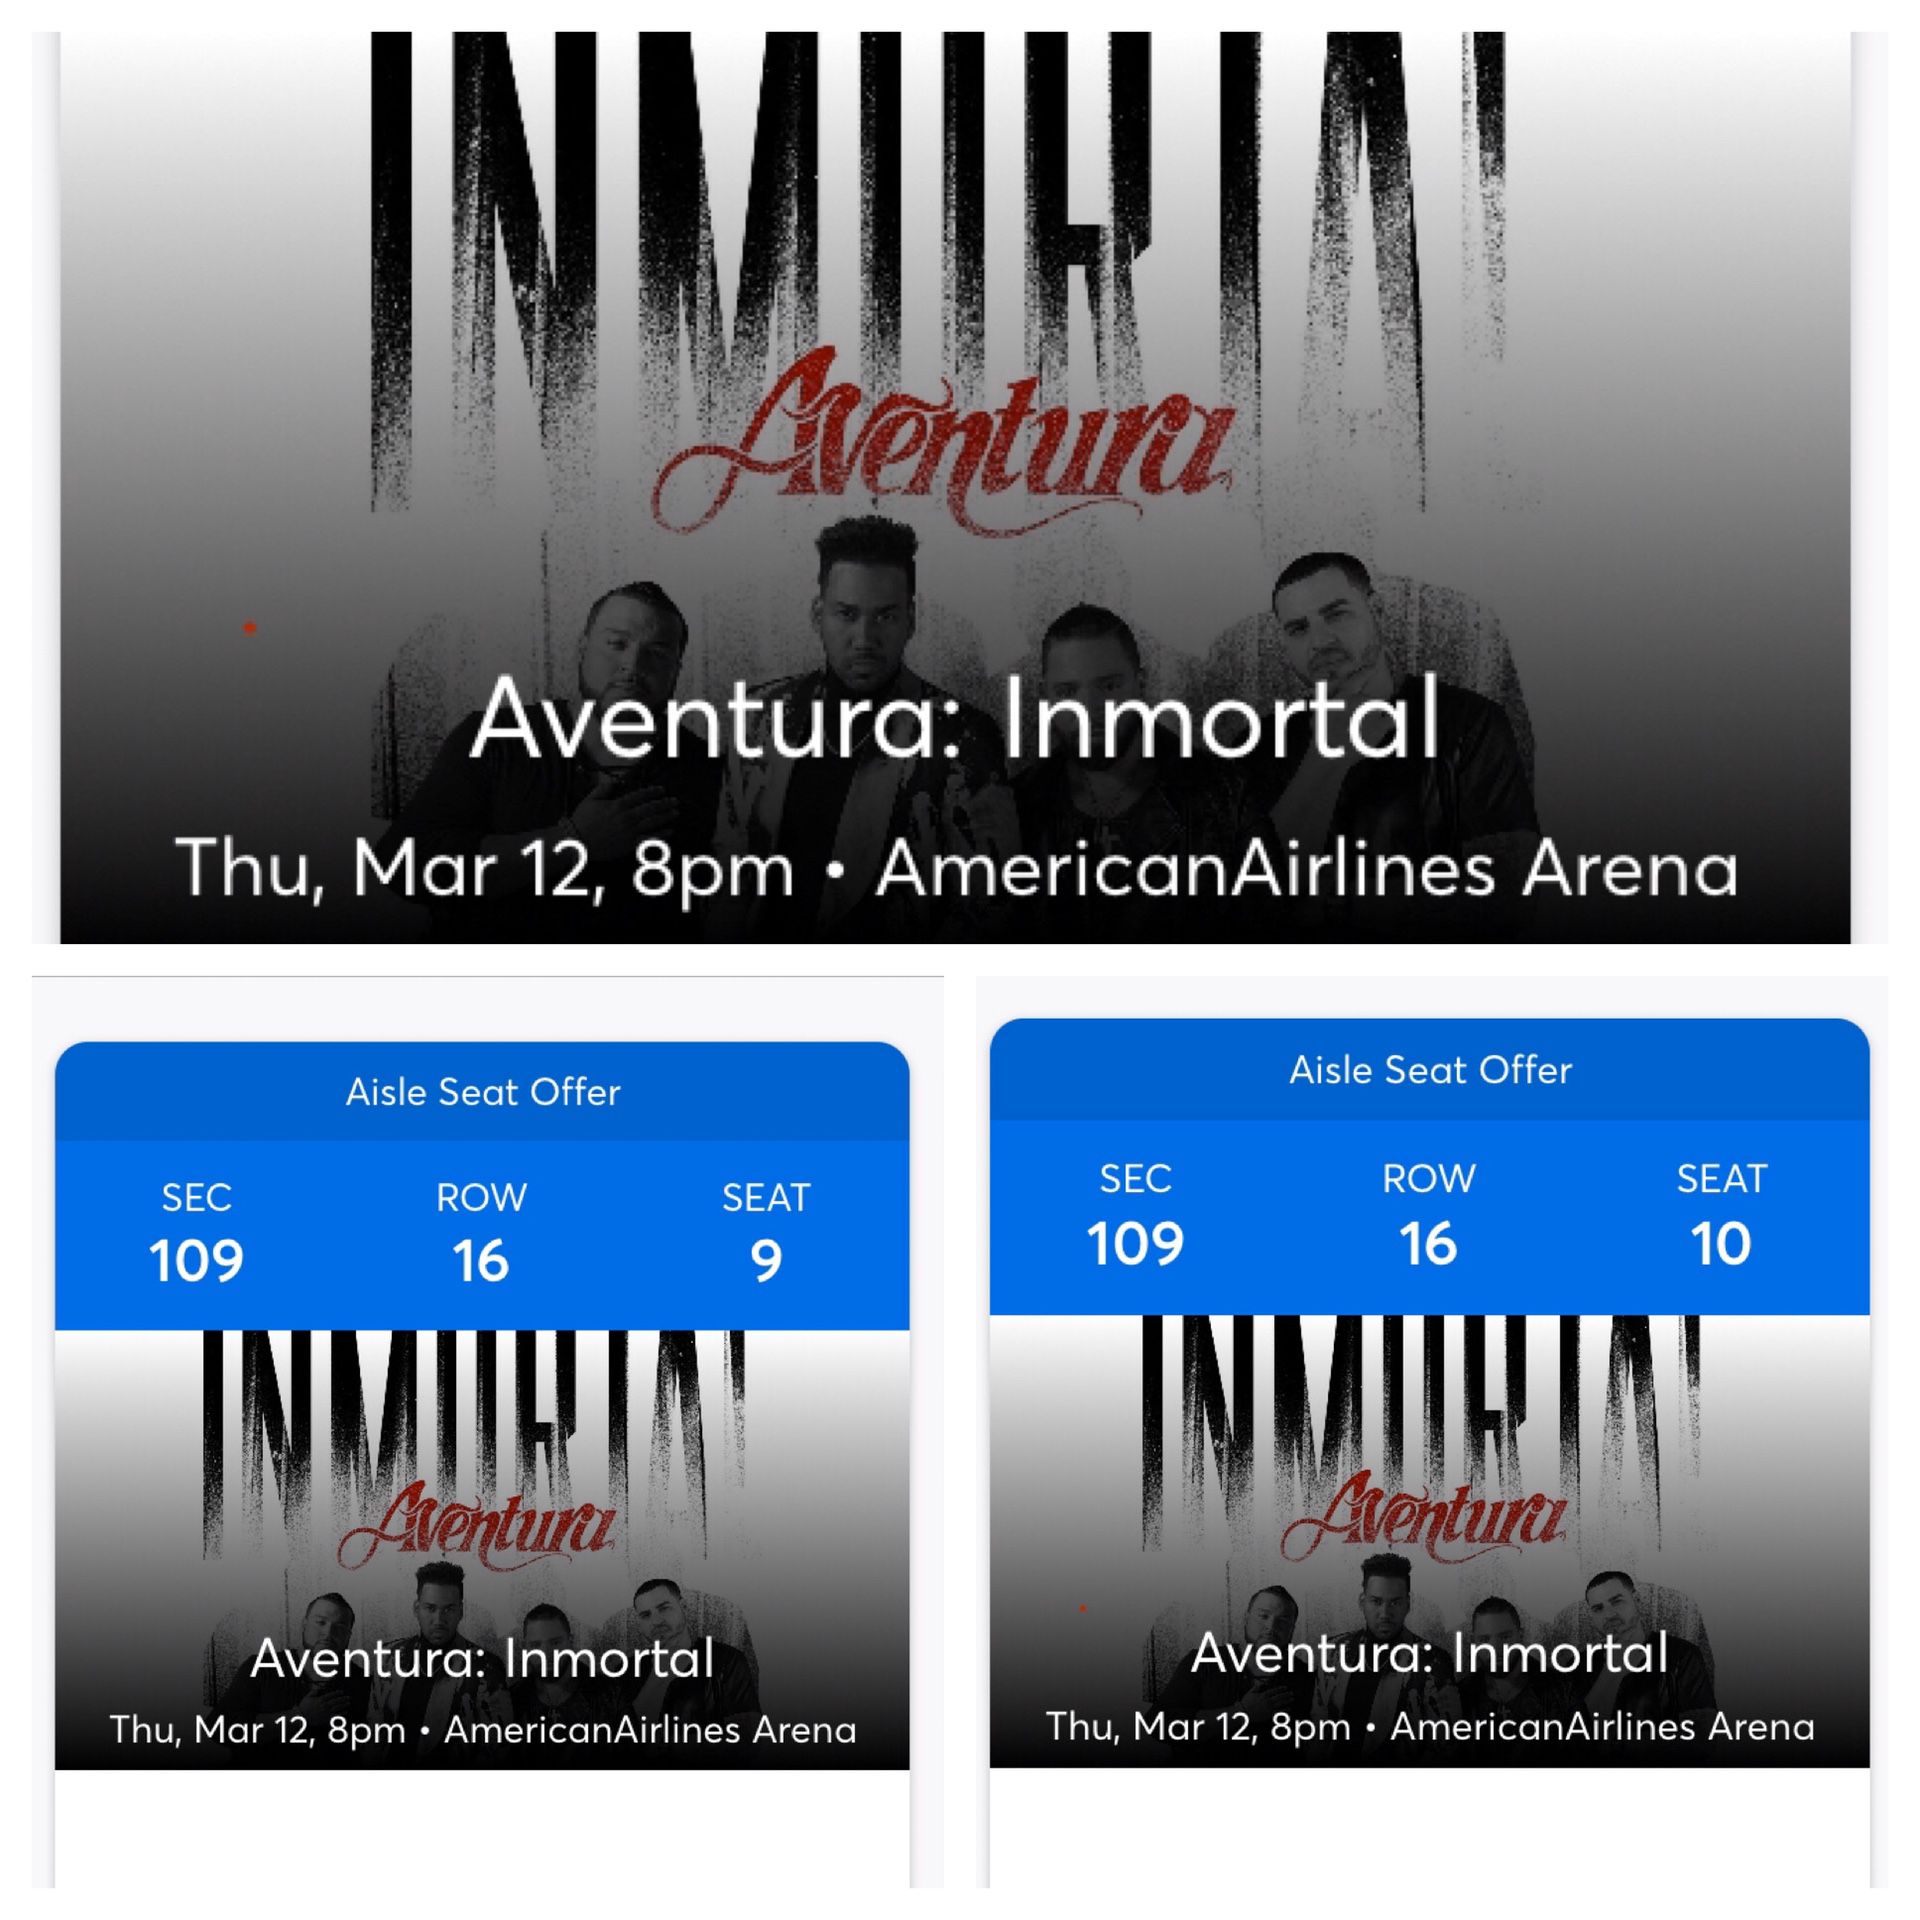 Aventura on March 12 at American Airlines Arena